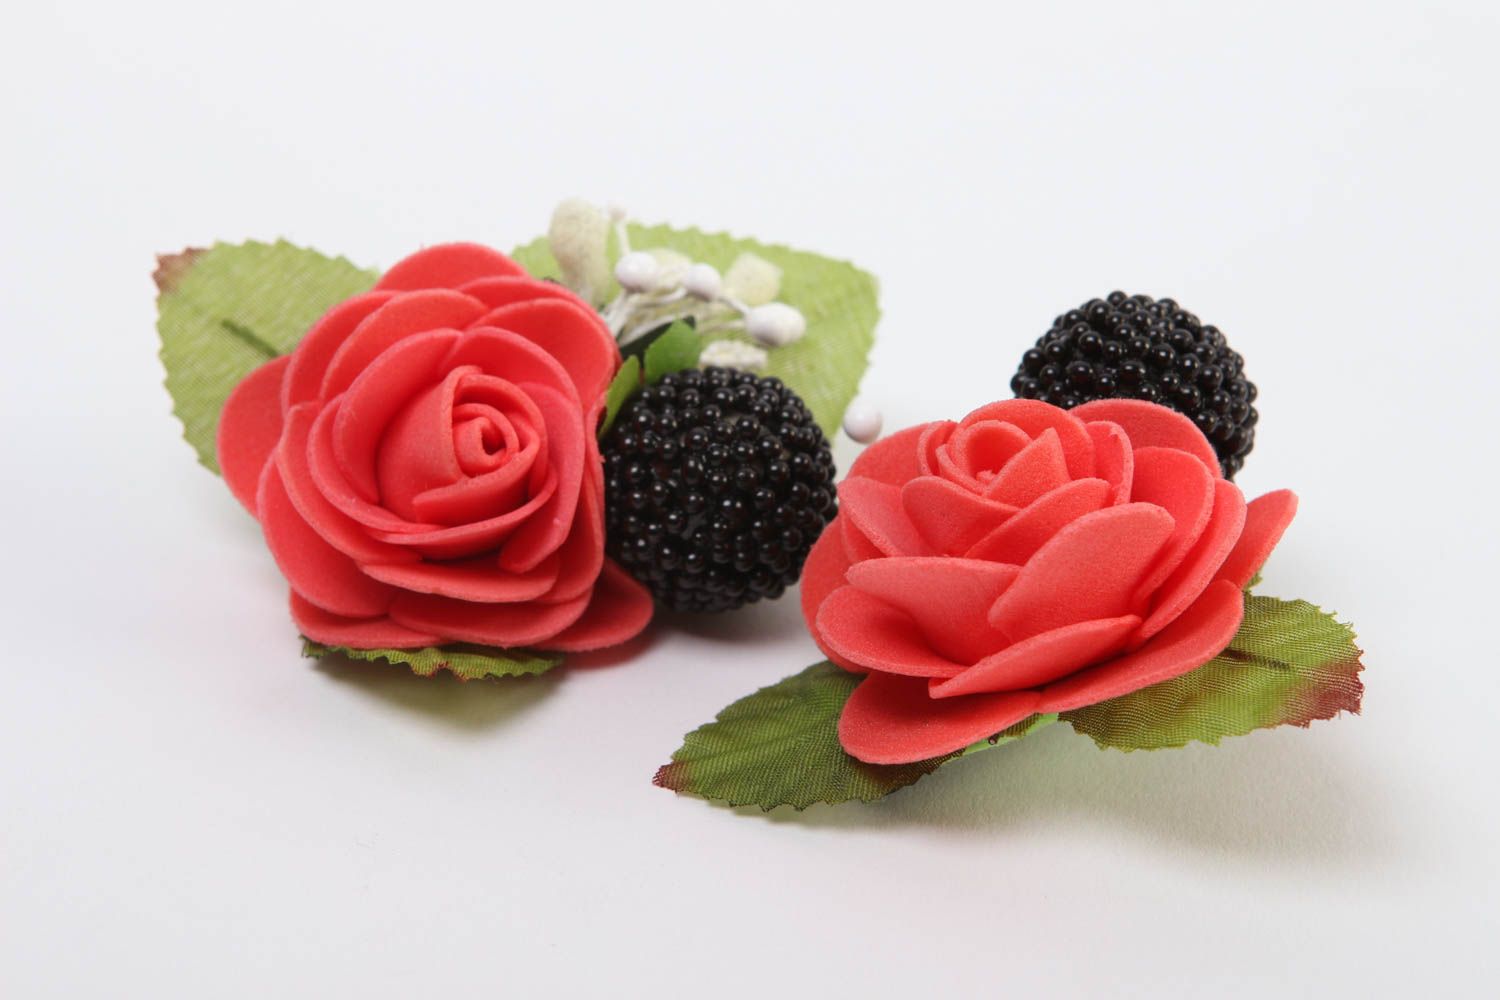 Handmade hair accessories 2 flower hair clips hair decorations gifts for girls photo 3